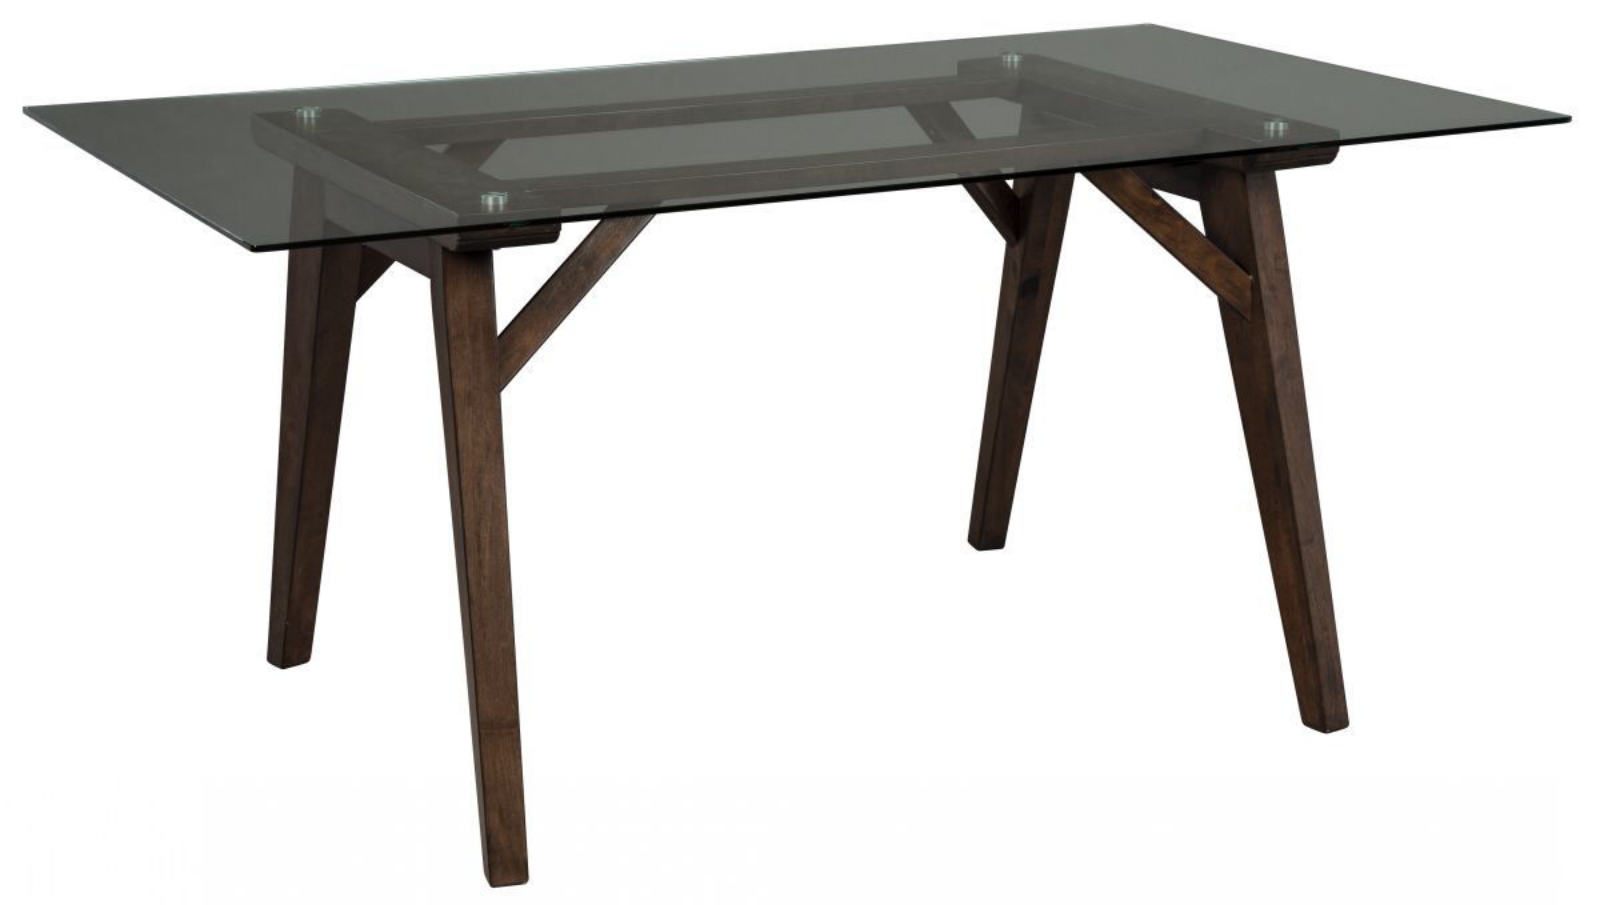 Picture of Joshton Dining Table